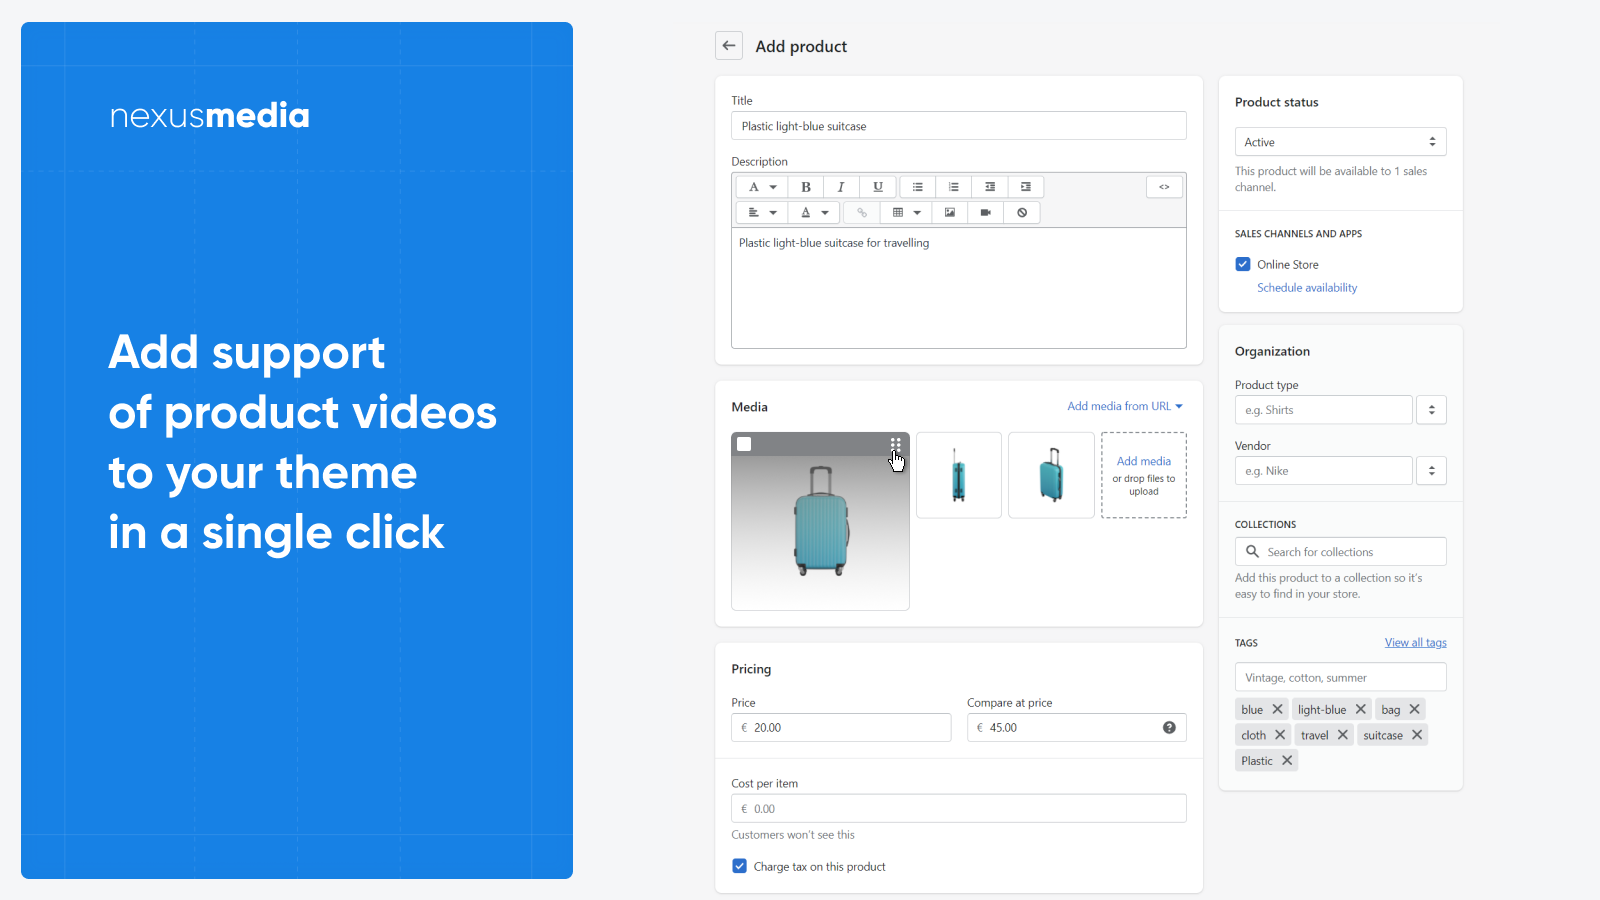 Add support of product videos to your theme with zero coding